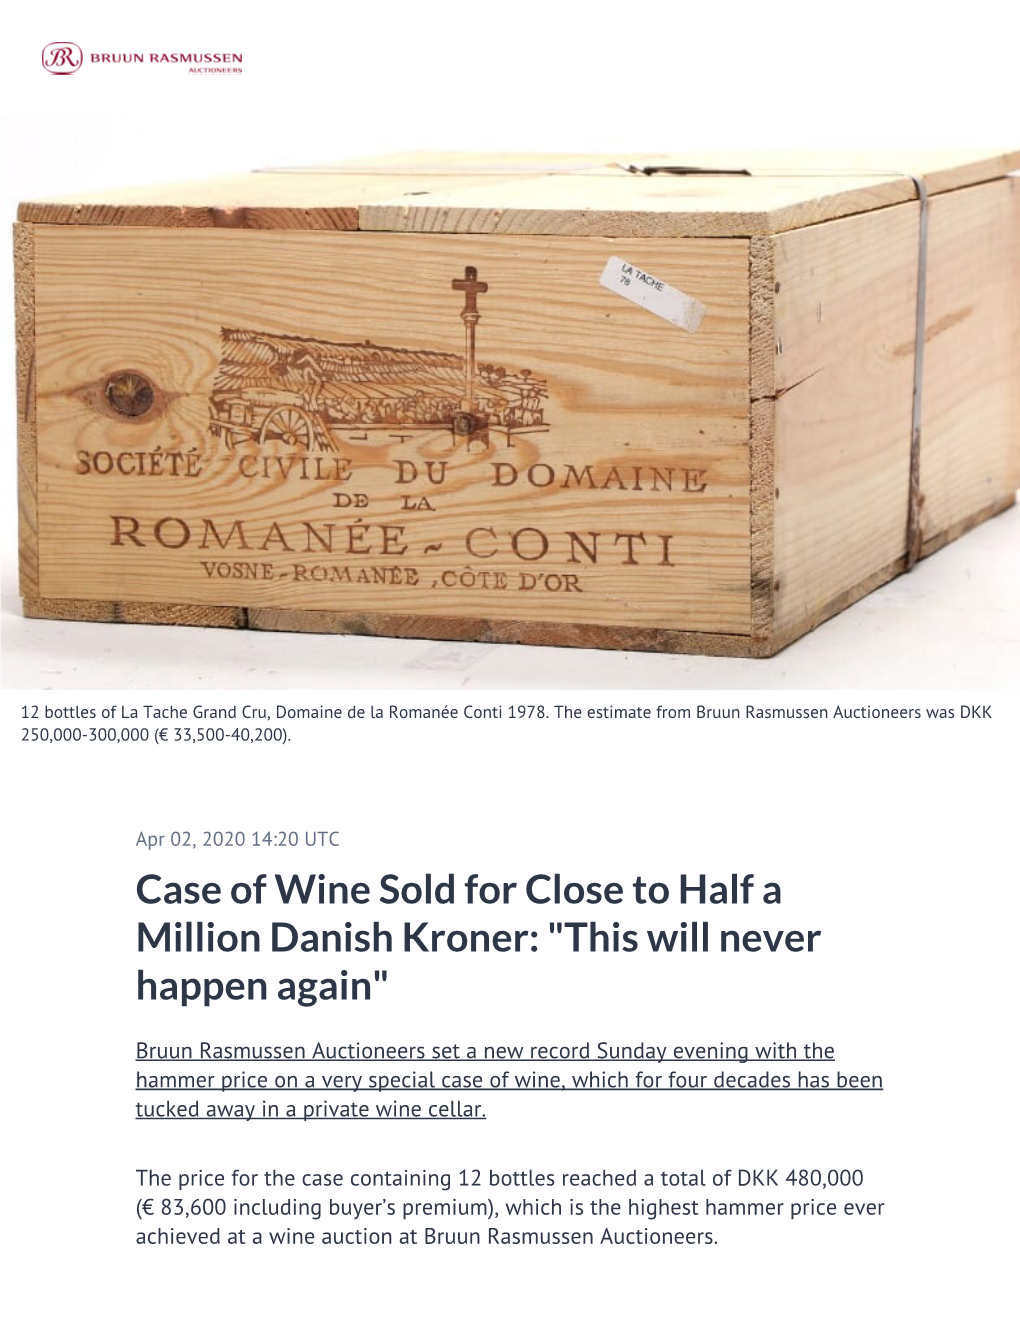 Case of Wine Sold for Close to Half a Million Danish Kroner: "This Will Never Happen Again"